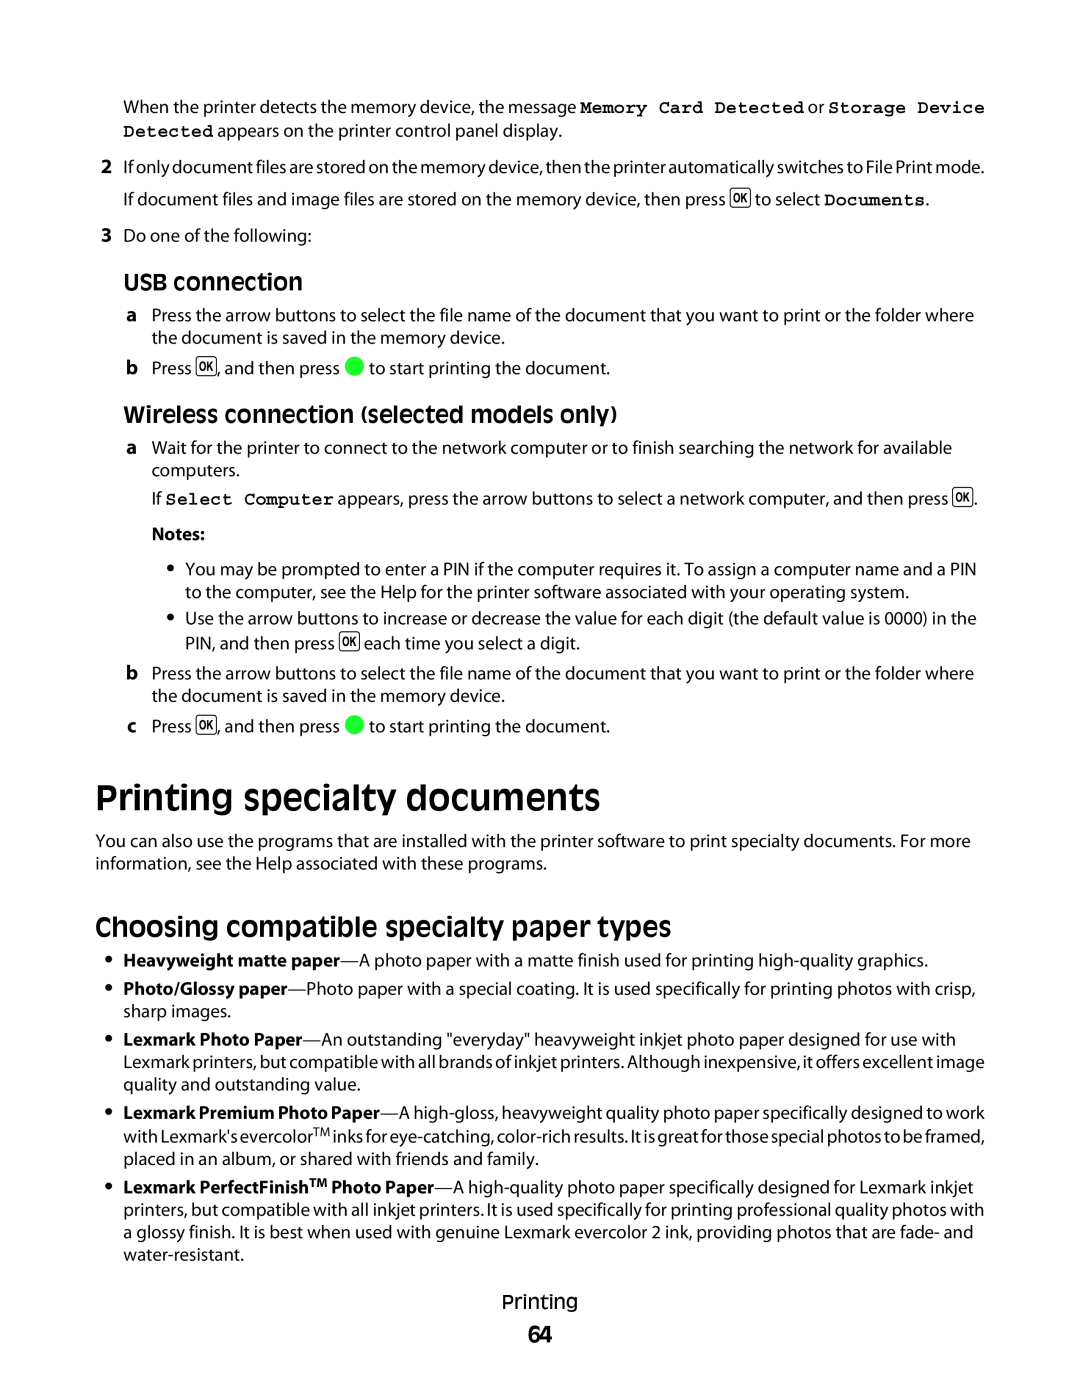 Lexmark 4600, 3600 manual Printing specialty documents, Choosing compatible specialty paper types, USB connection 